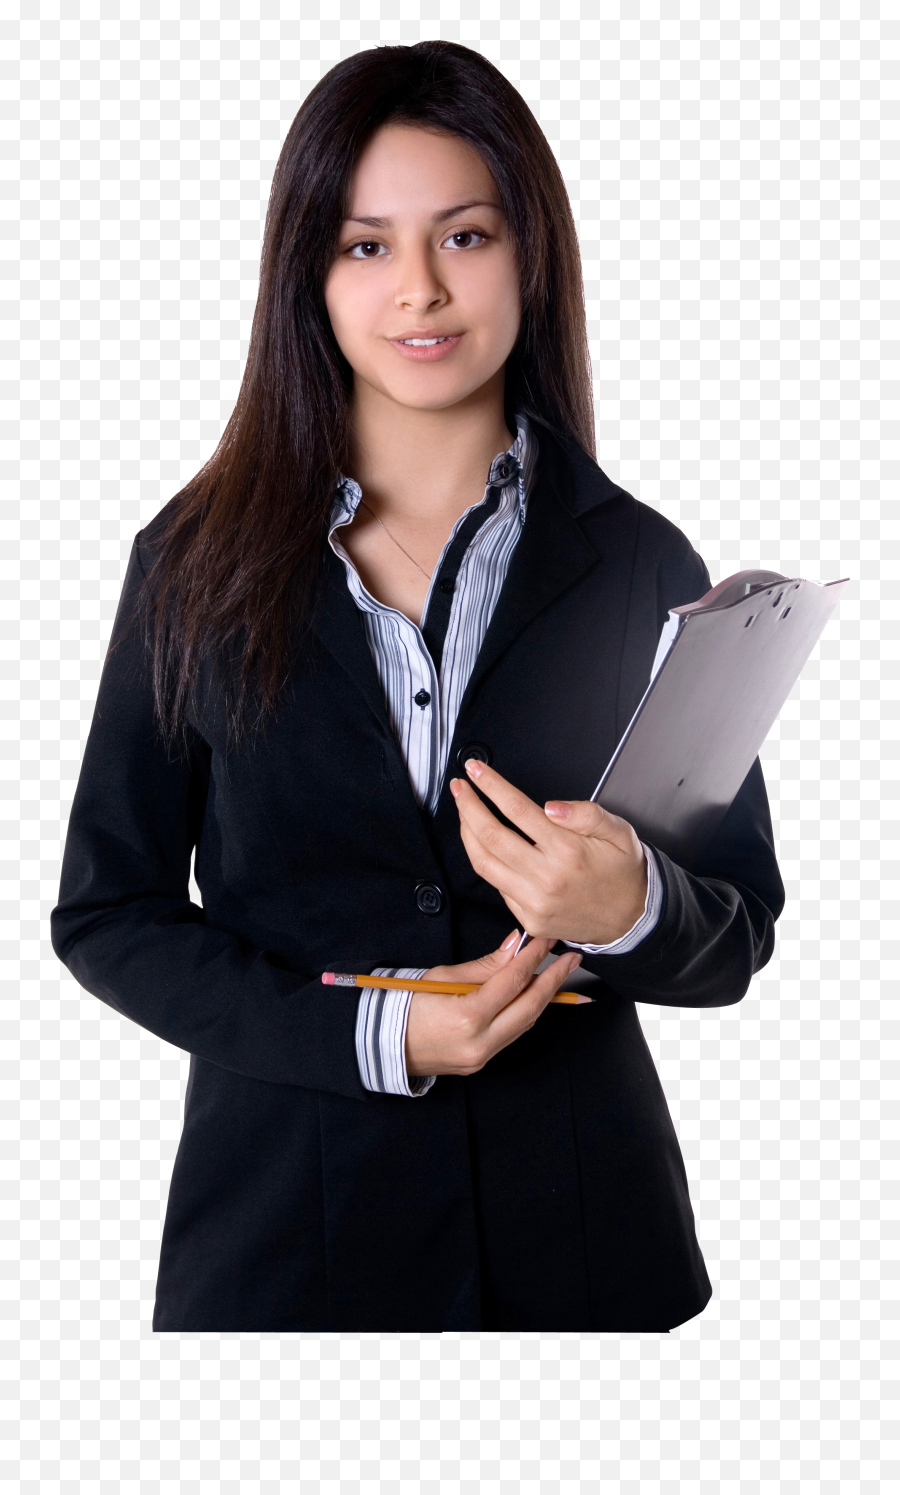 Top Recruitment Agency In Miami - Business Woman Transparent Background Png,Staff Png